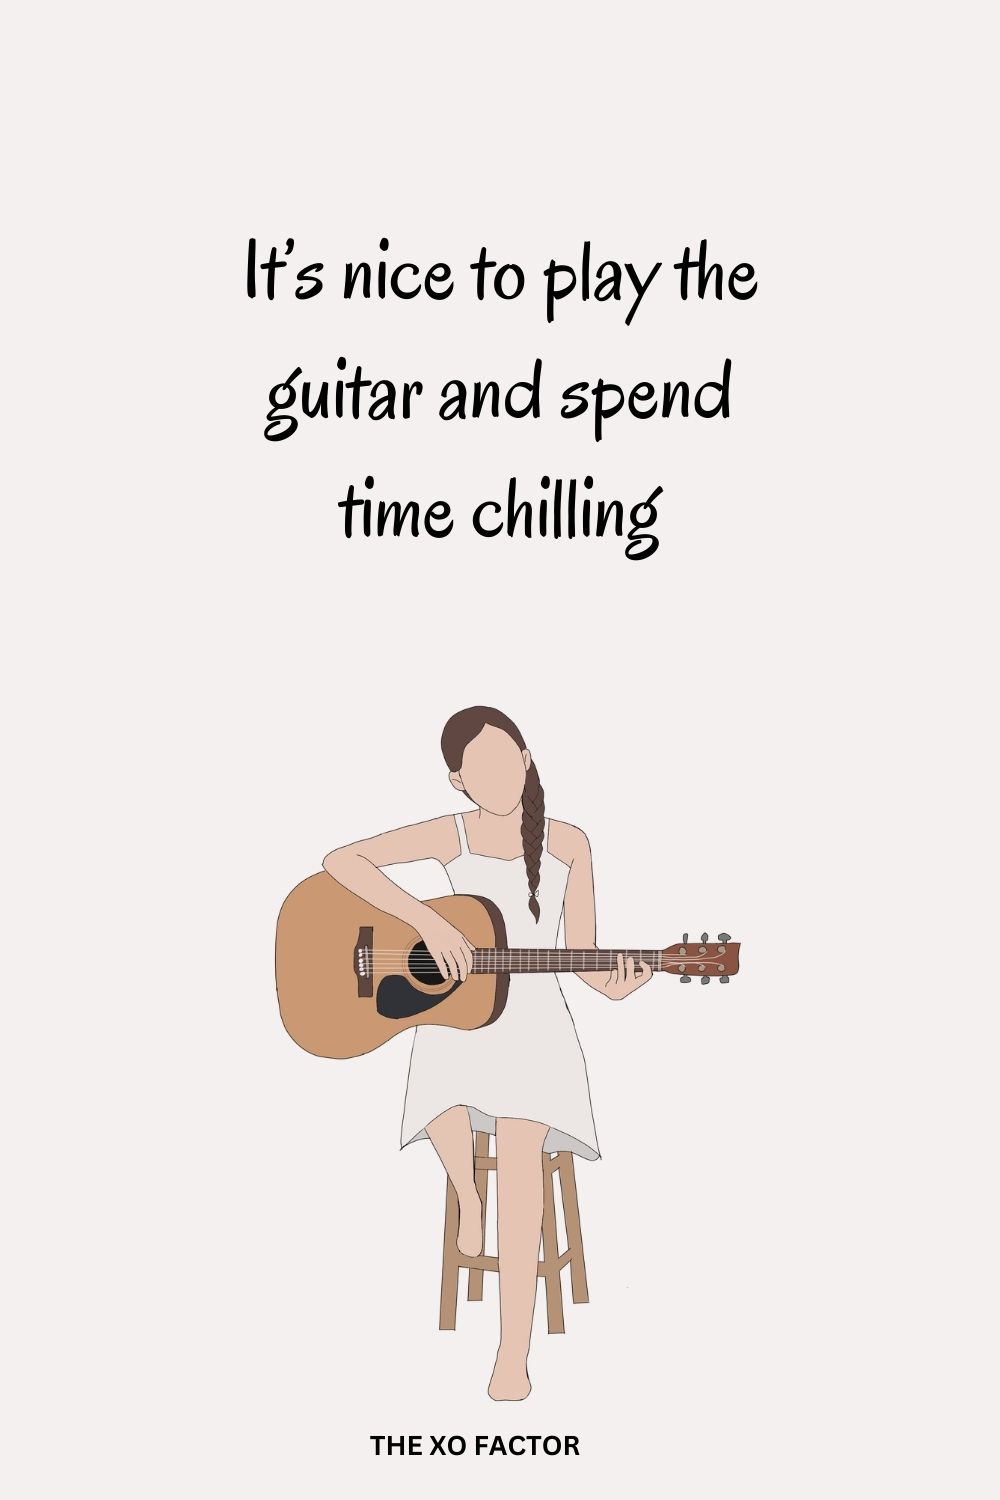 It’s nice to play the guitar and spend time chilling